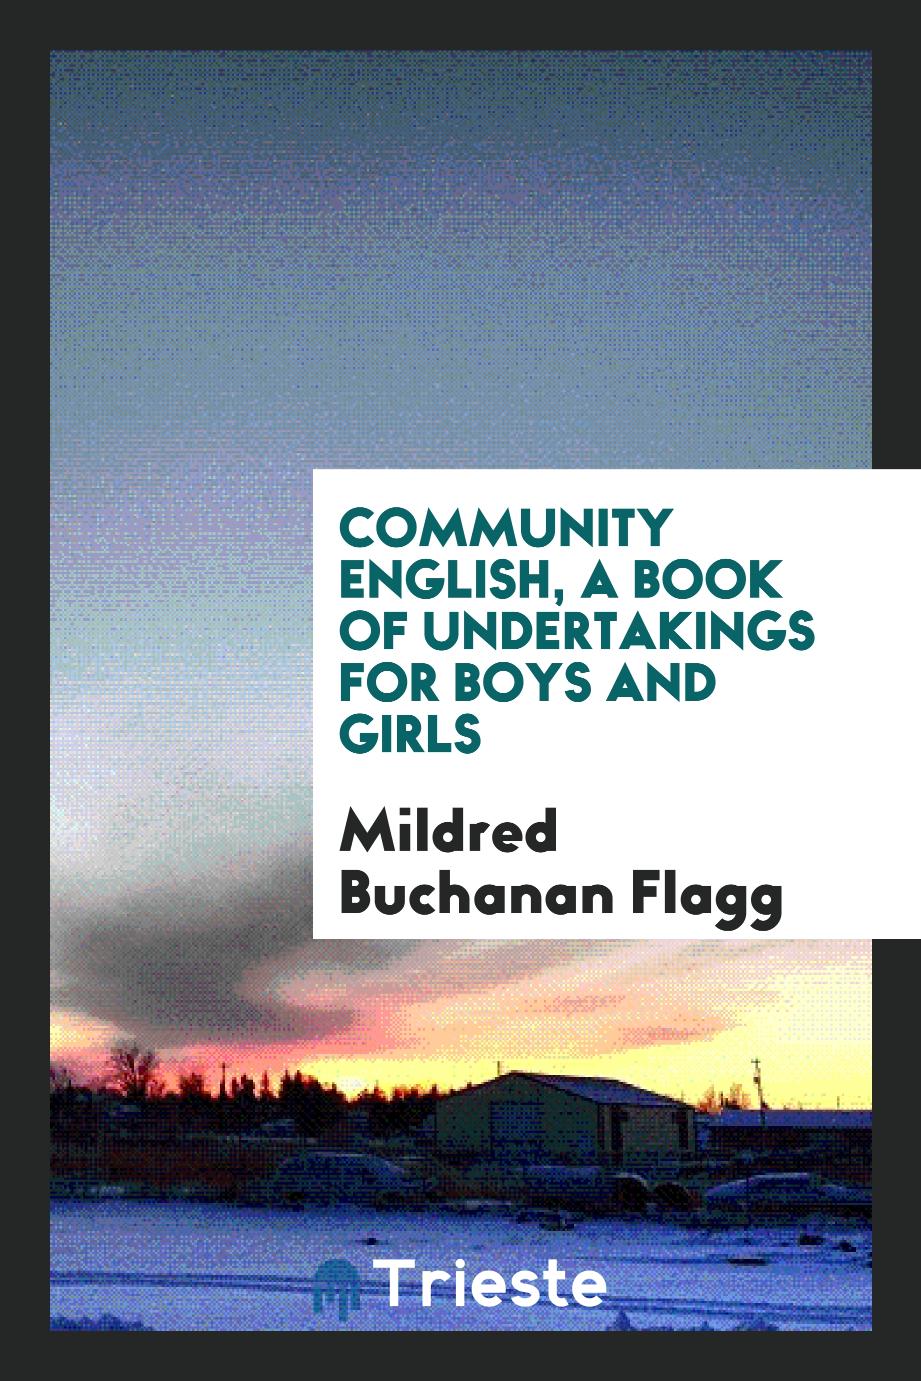 Community English, a book of undertakings for boys and girls